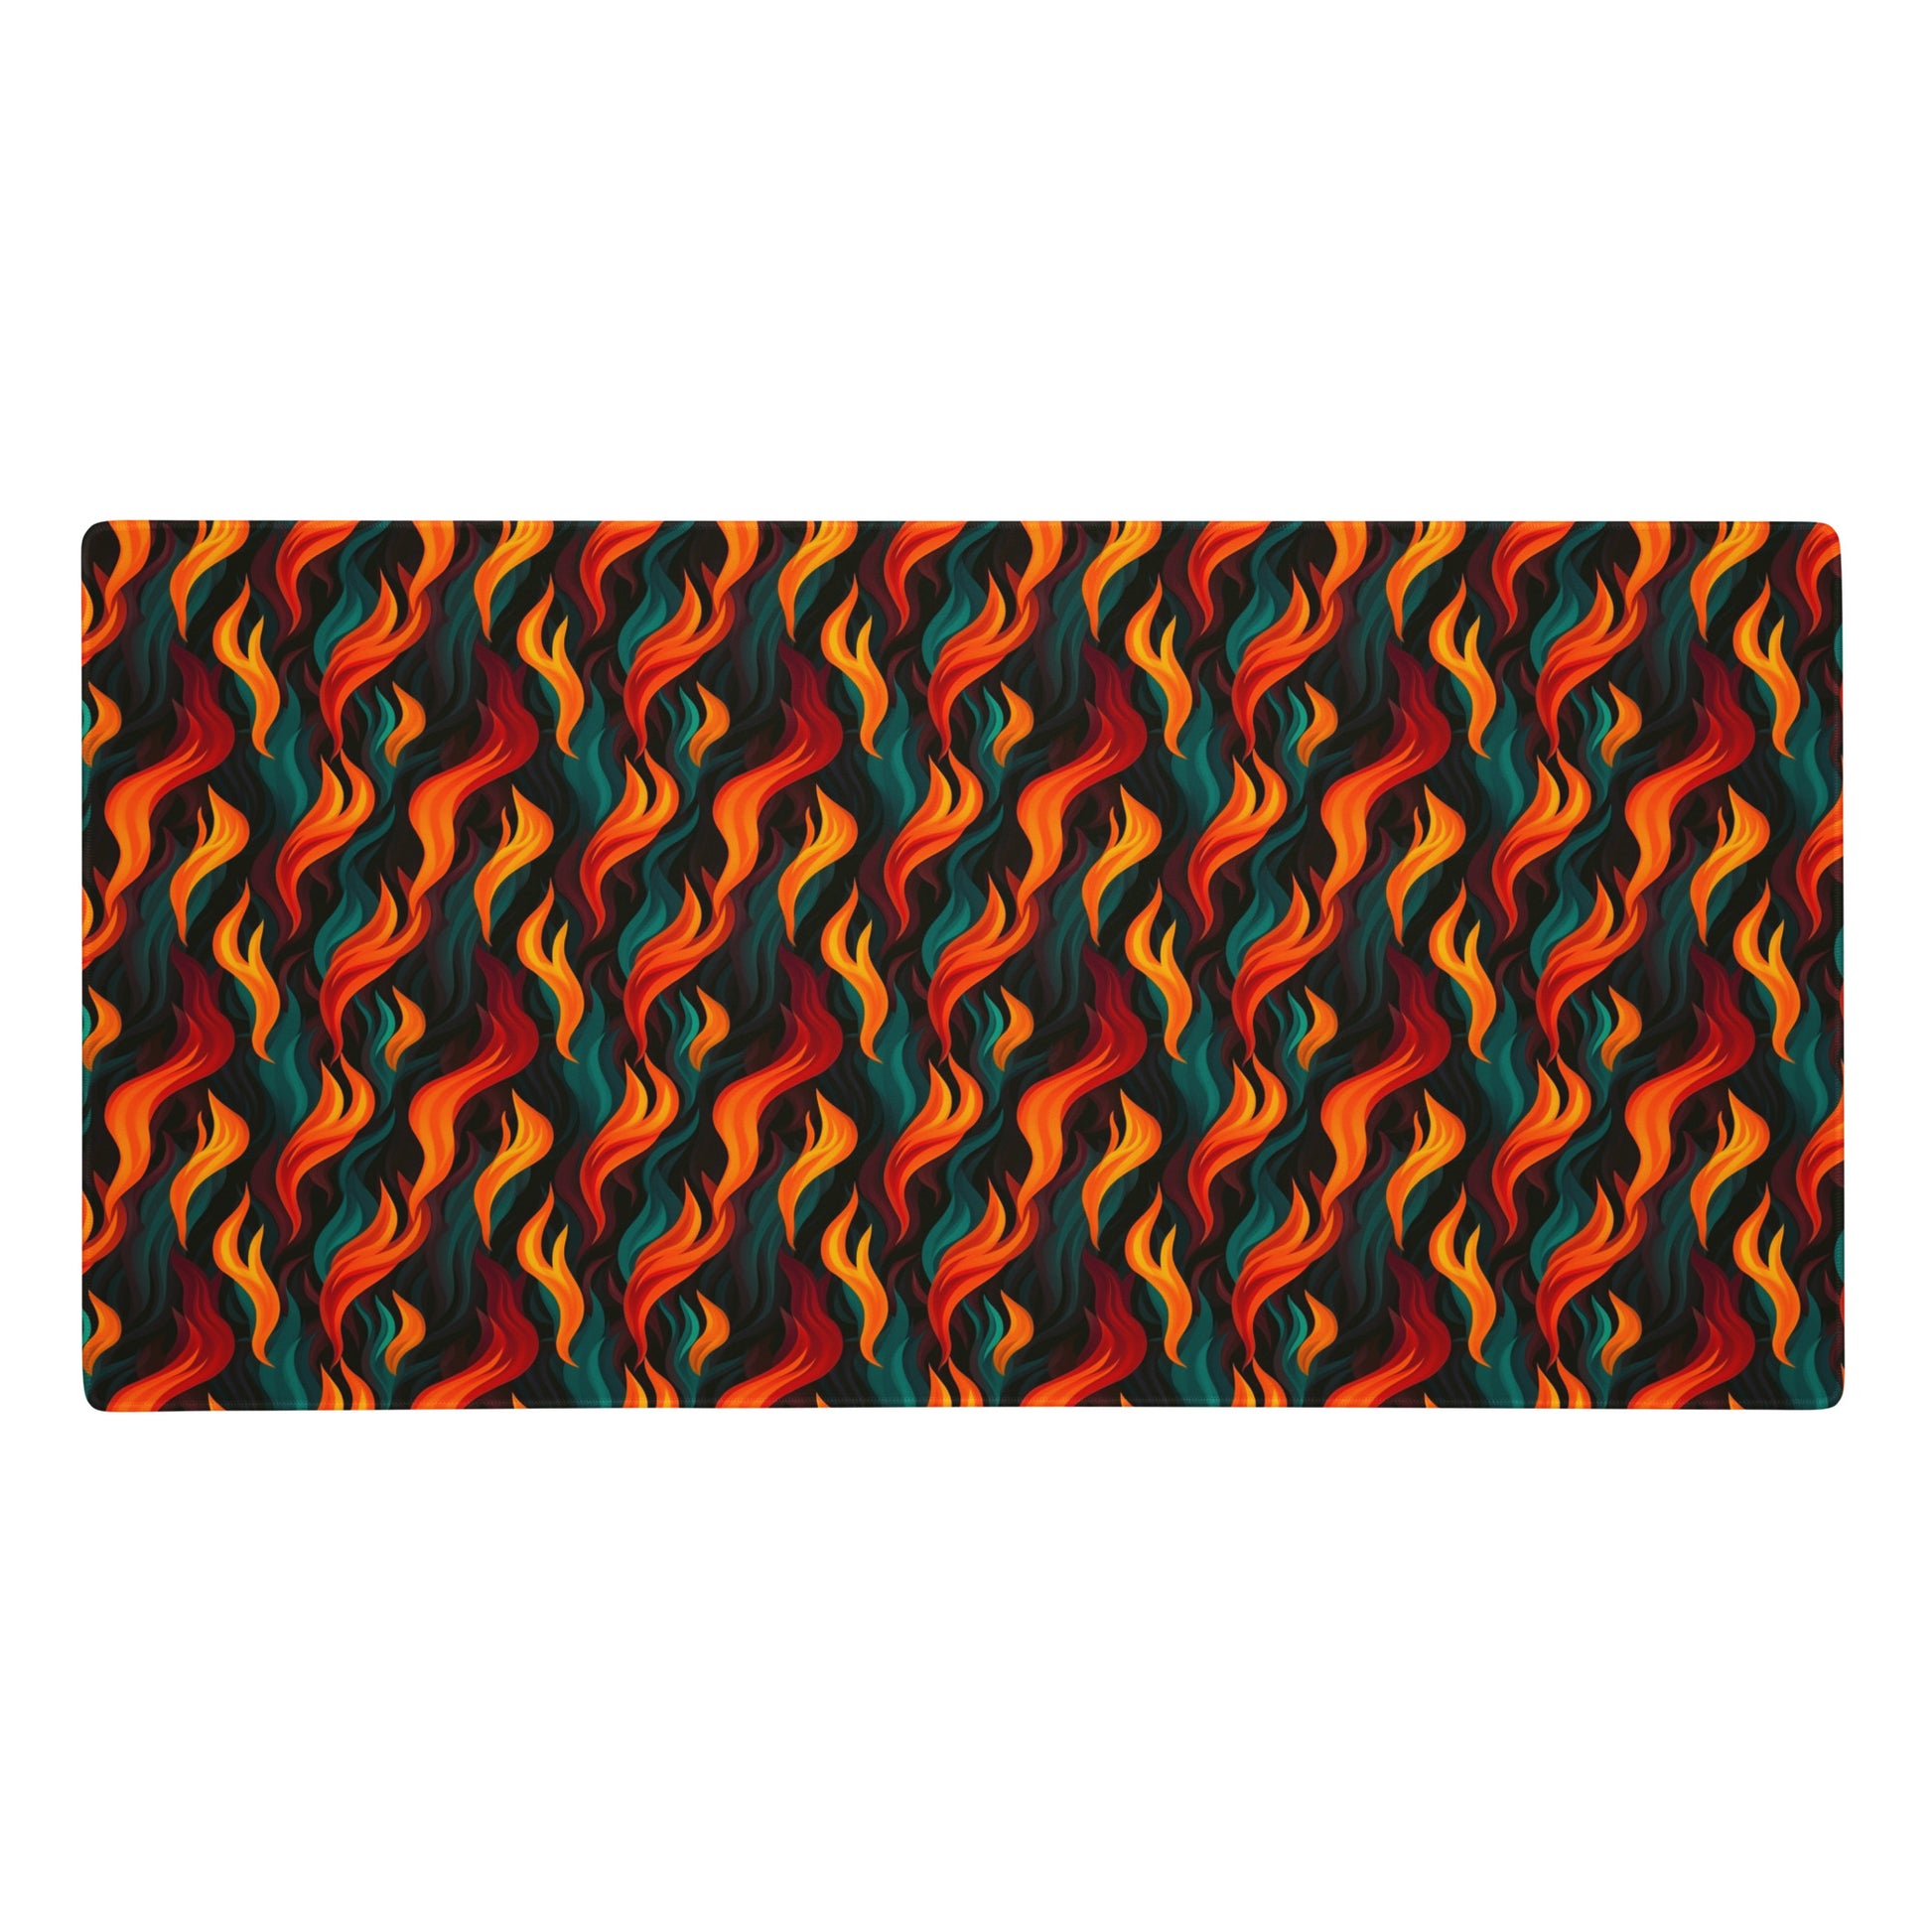 A 36" x 18" desk pad with a wavy flame pattern on it. Red and Teal in color.